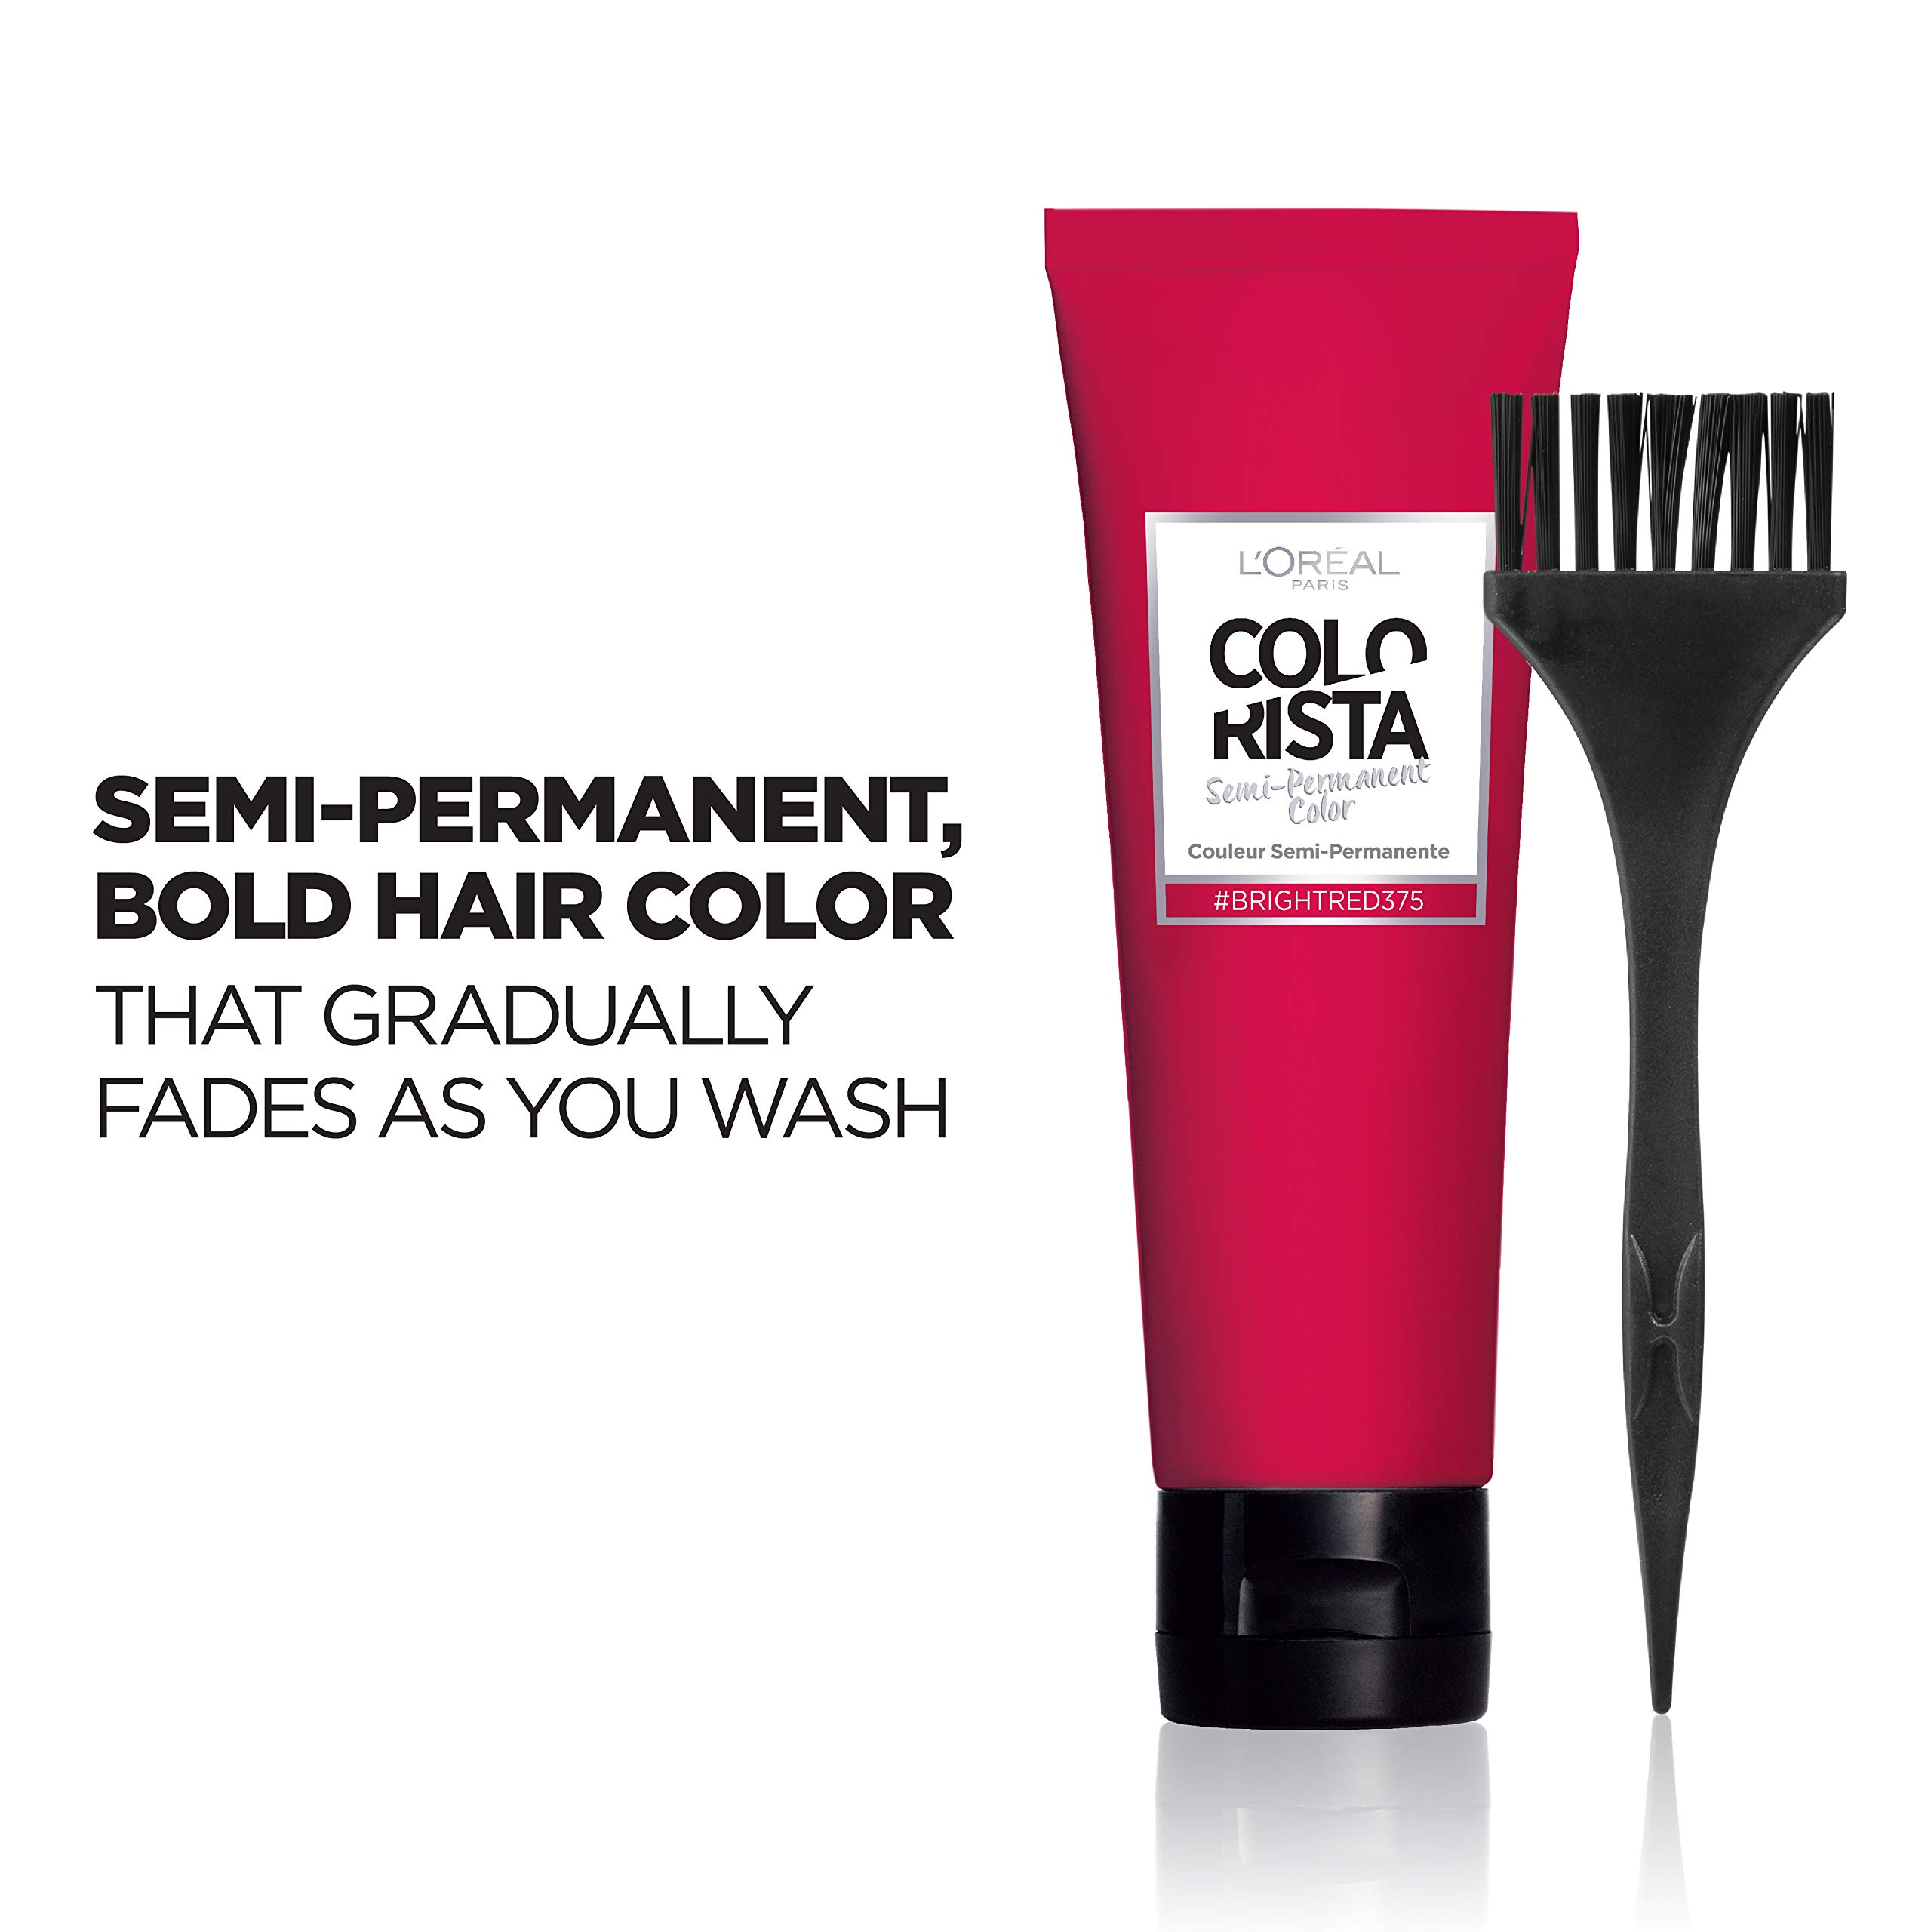 L'Oreal Paris Colorista Semi-Permanent Hair Color for Platinum, Light and Medium Blondes, Bleached hair or Highlighted Hair, Bright Red